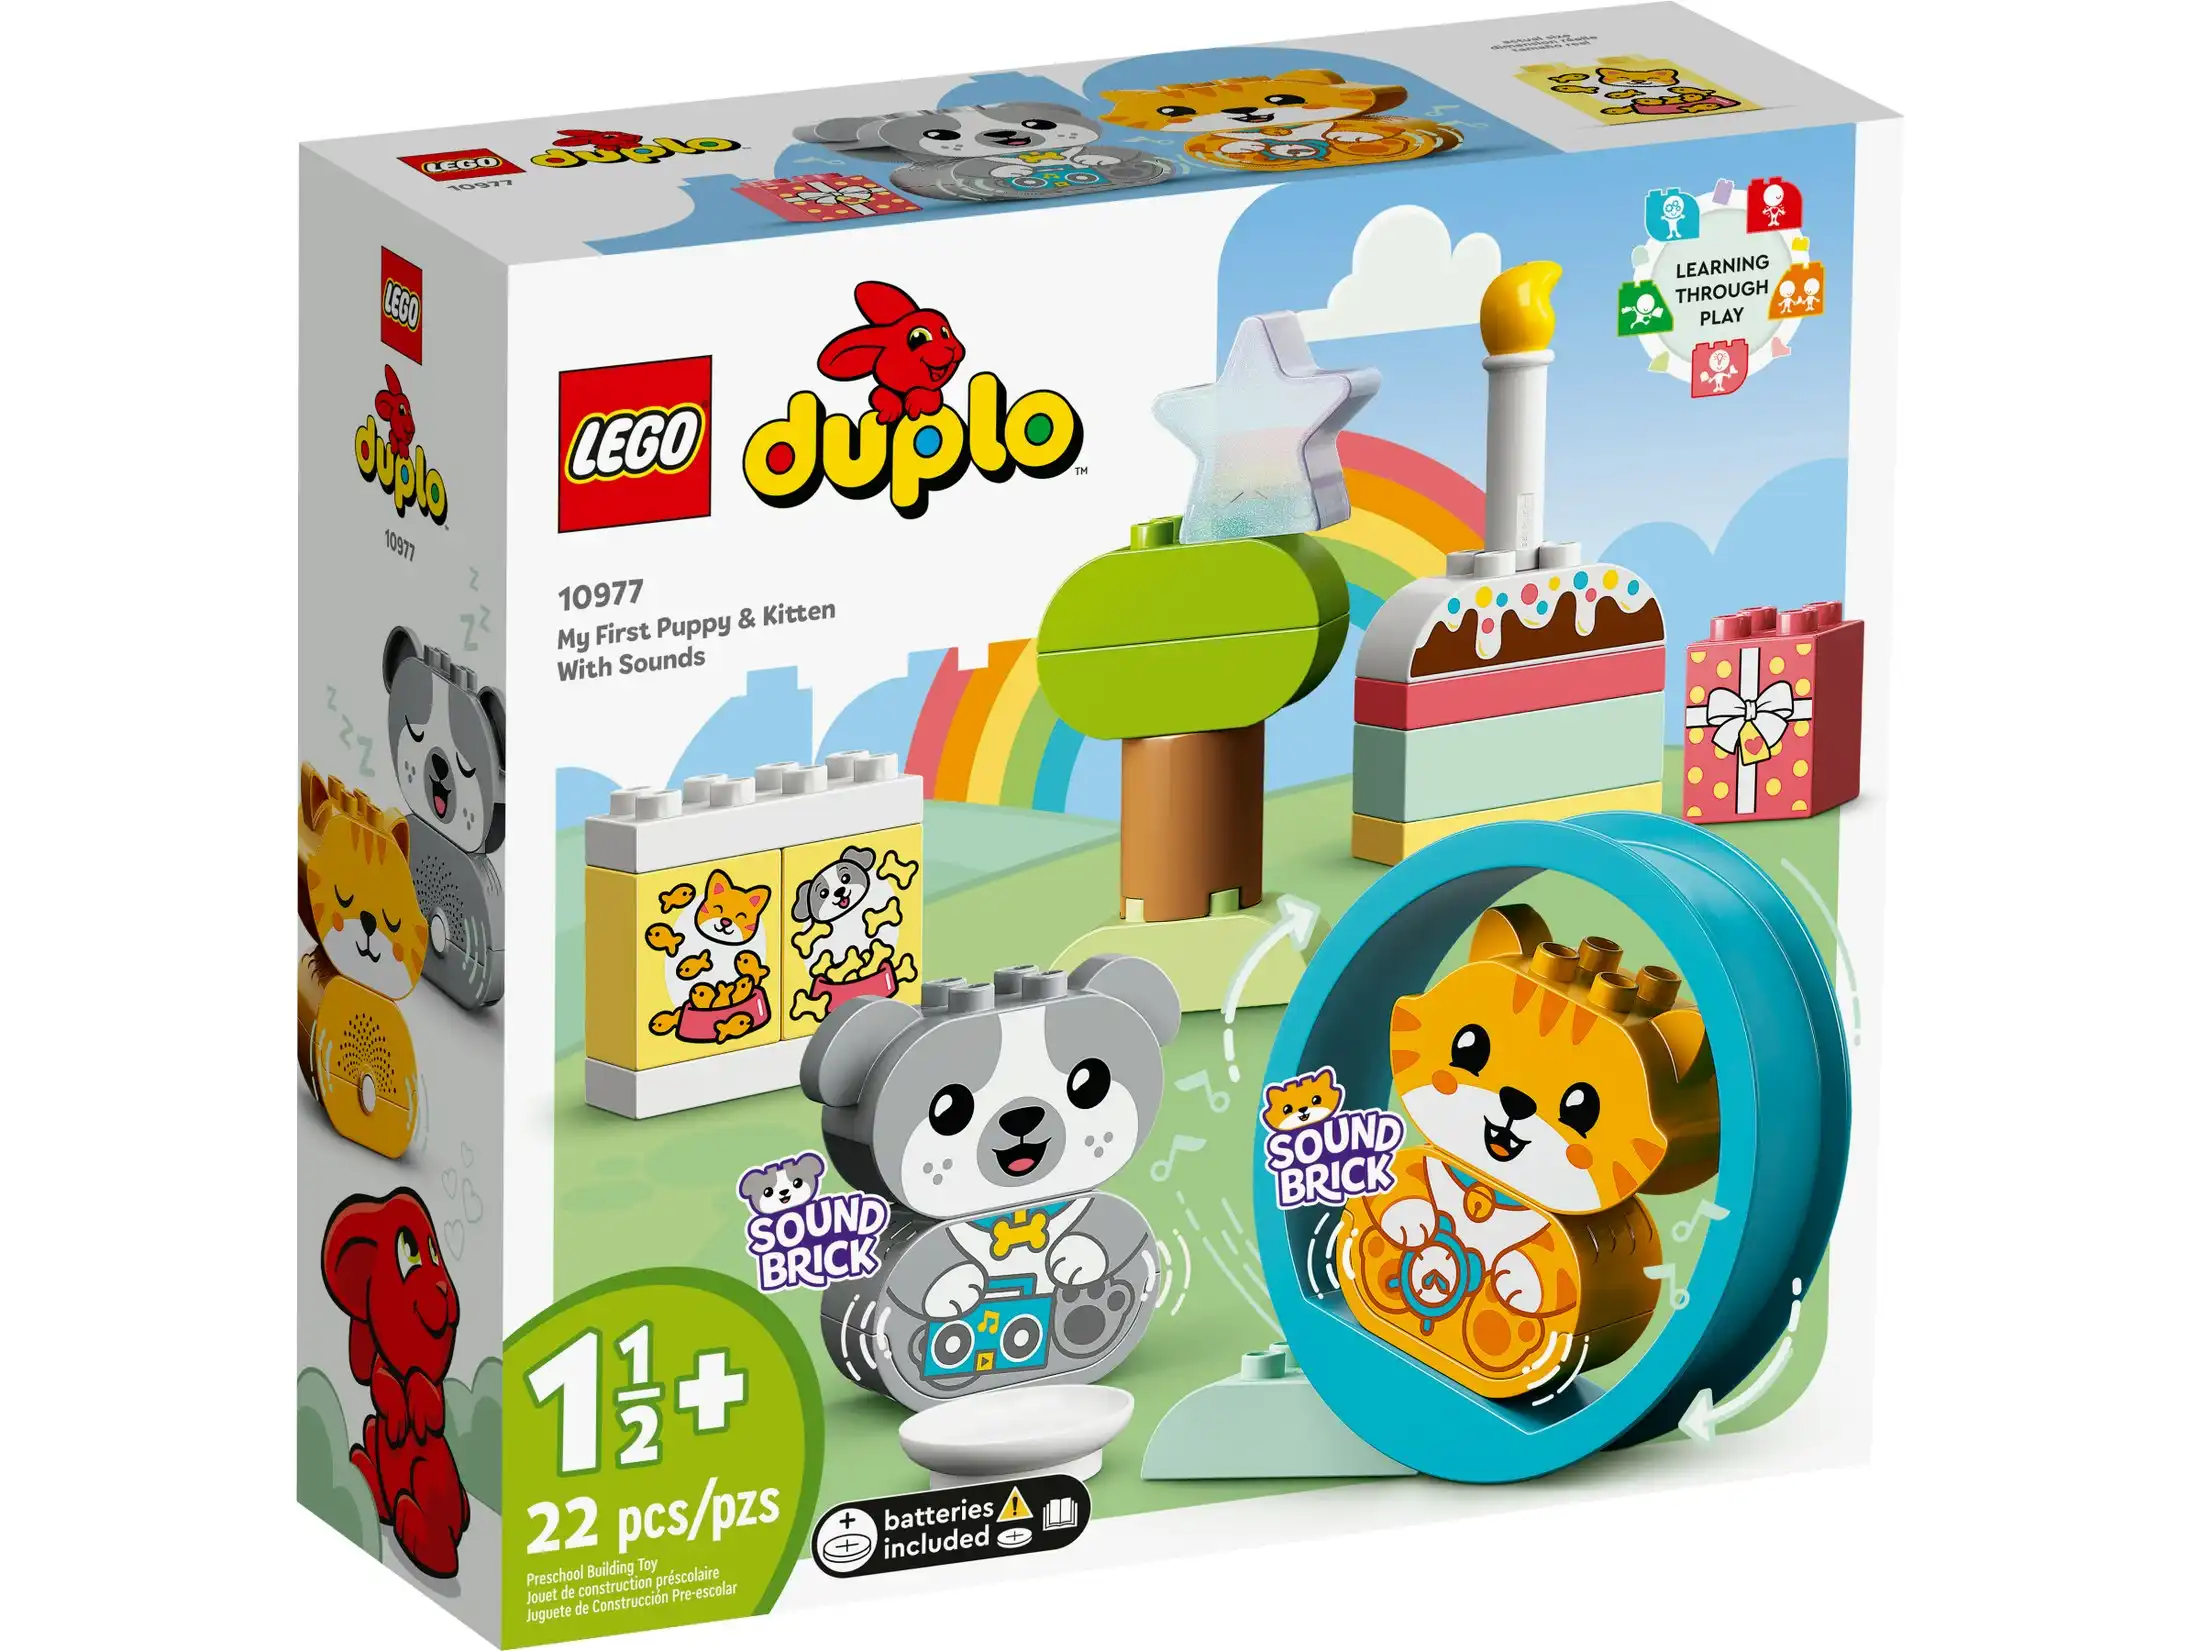 LEGO 10977 My First Puppy & Kitten With Sounds - Duplo My First